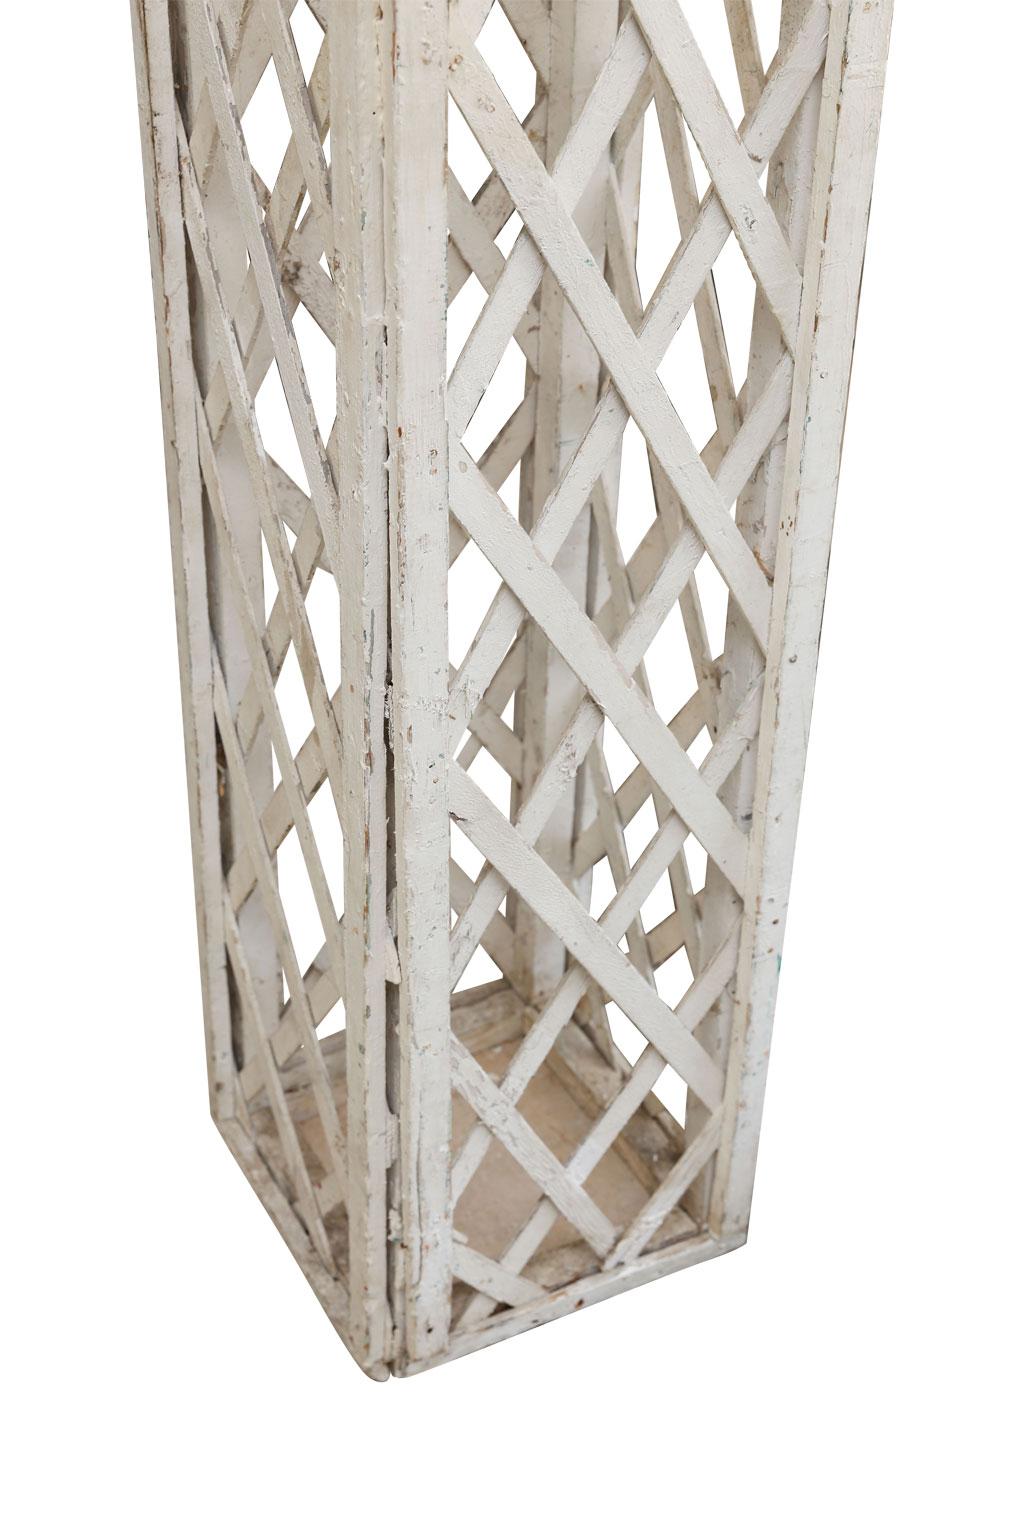 Vintage French White Painted Trellis For Sale 4